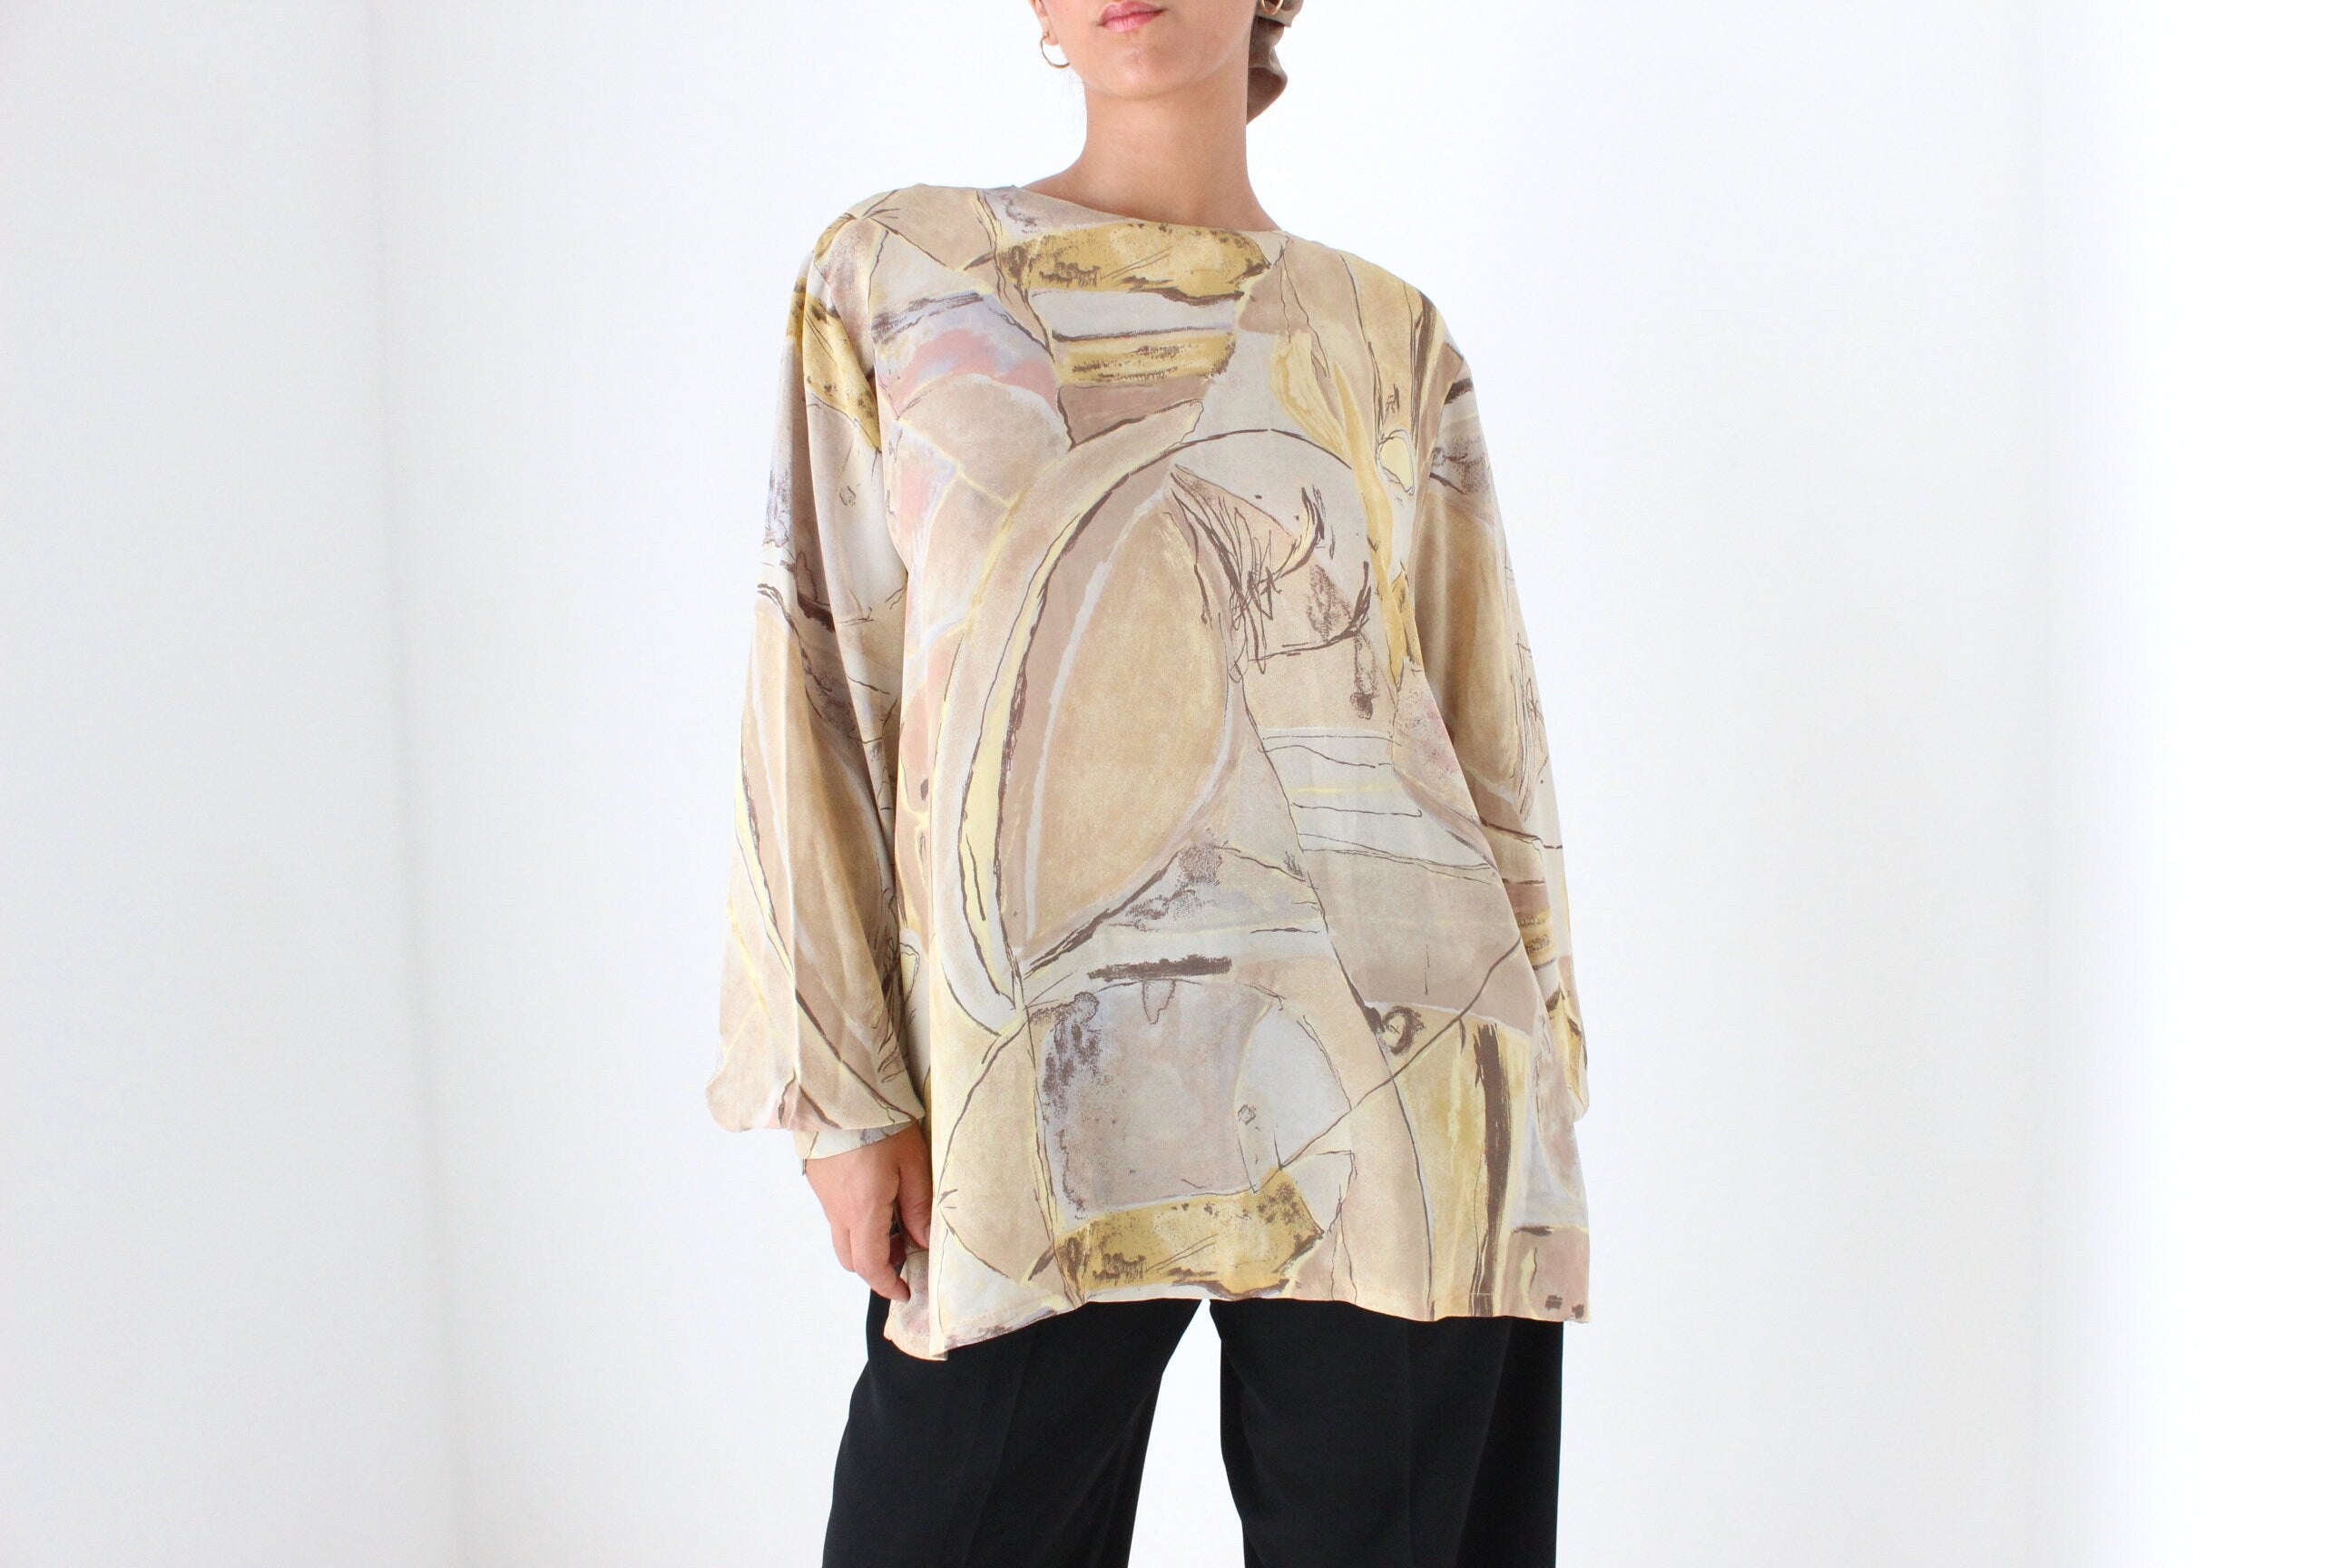 Stunning 90s Abstract Wearable Art Relaxed Top